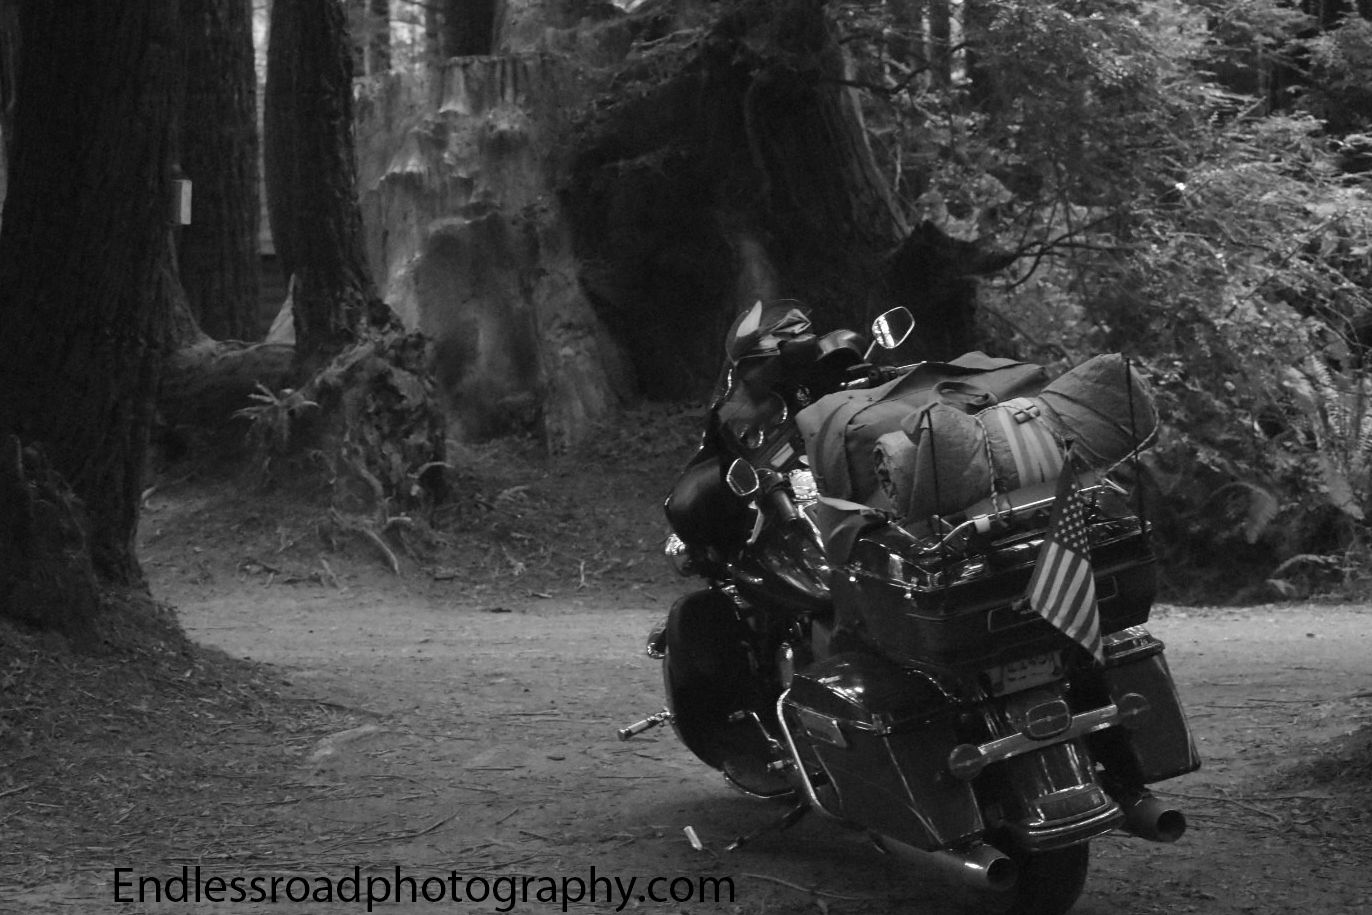 Motorcycle, Veteran, Black and White, Red Wood Trees, restful, peaceful, parked, camping, beautiful 